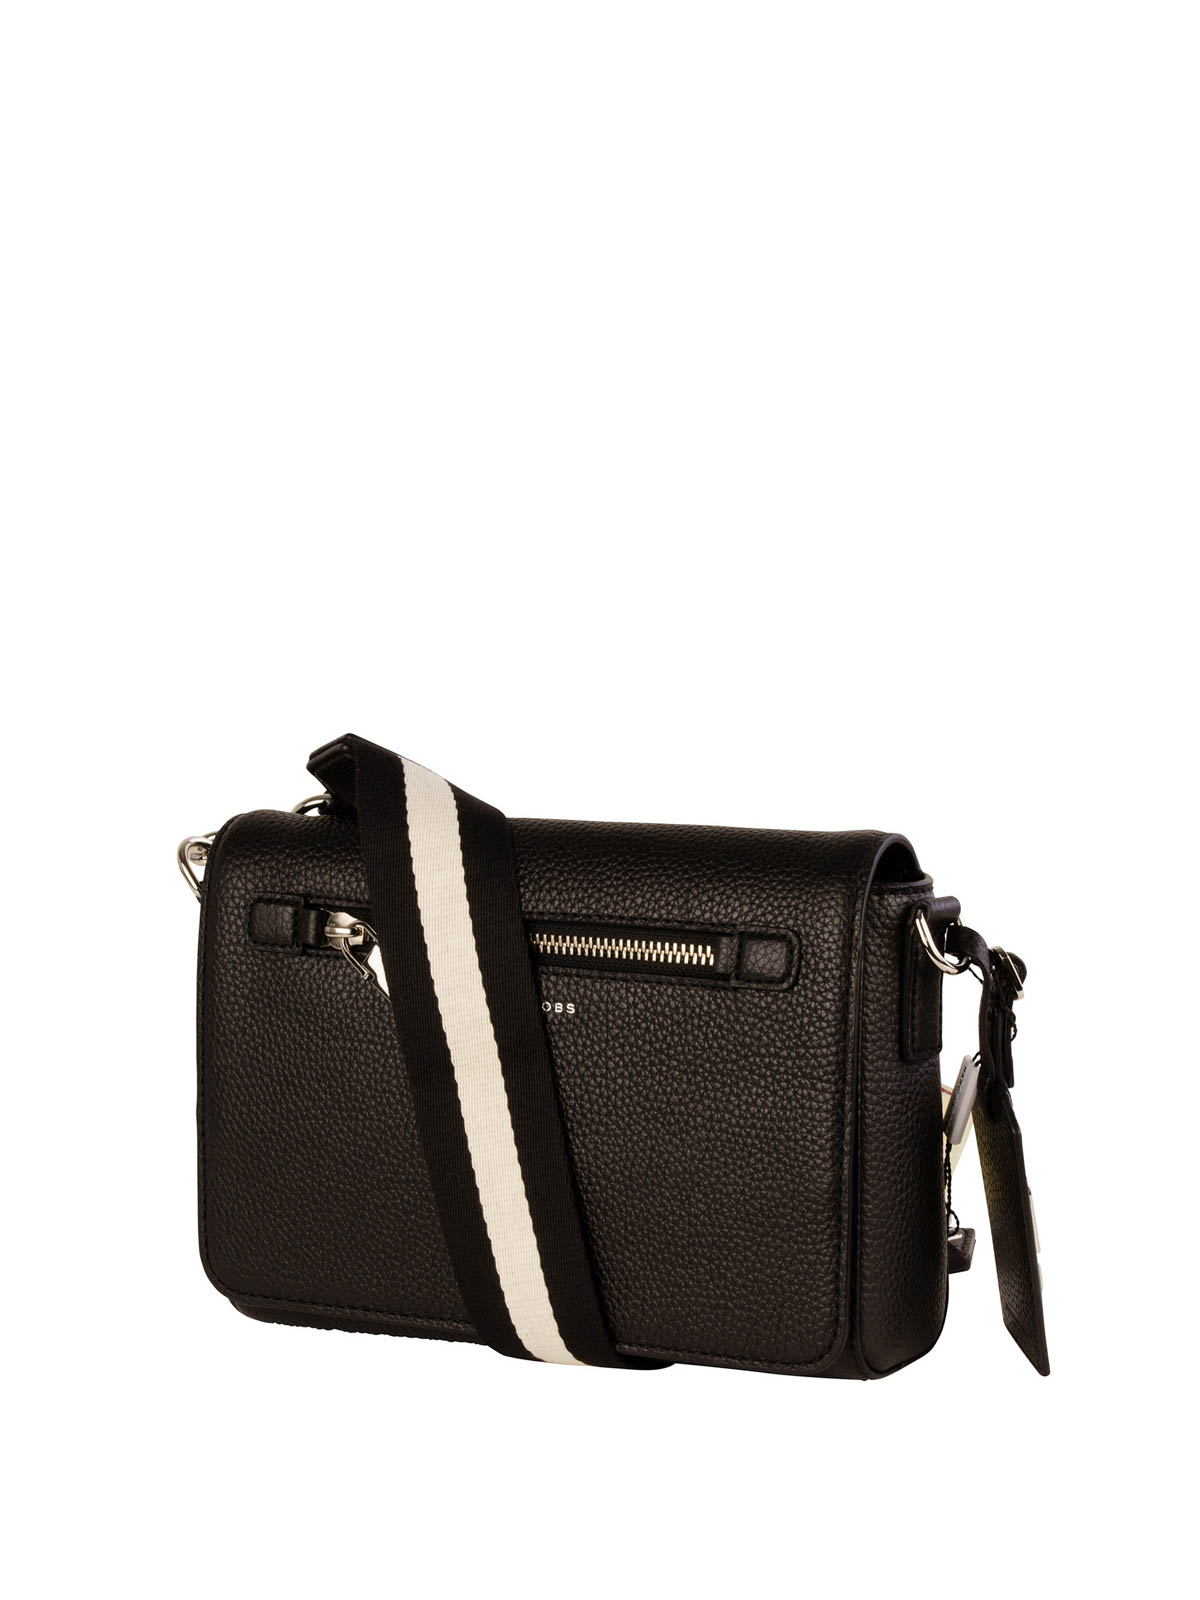 Gotham small leather cross body bag by Marc Jacobs - cross body bags | iKRIX